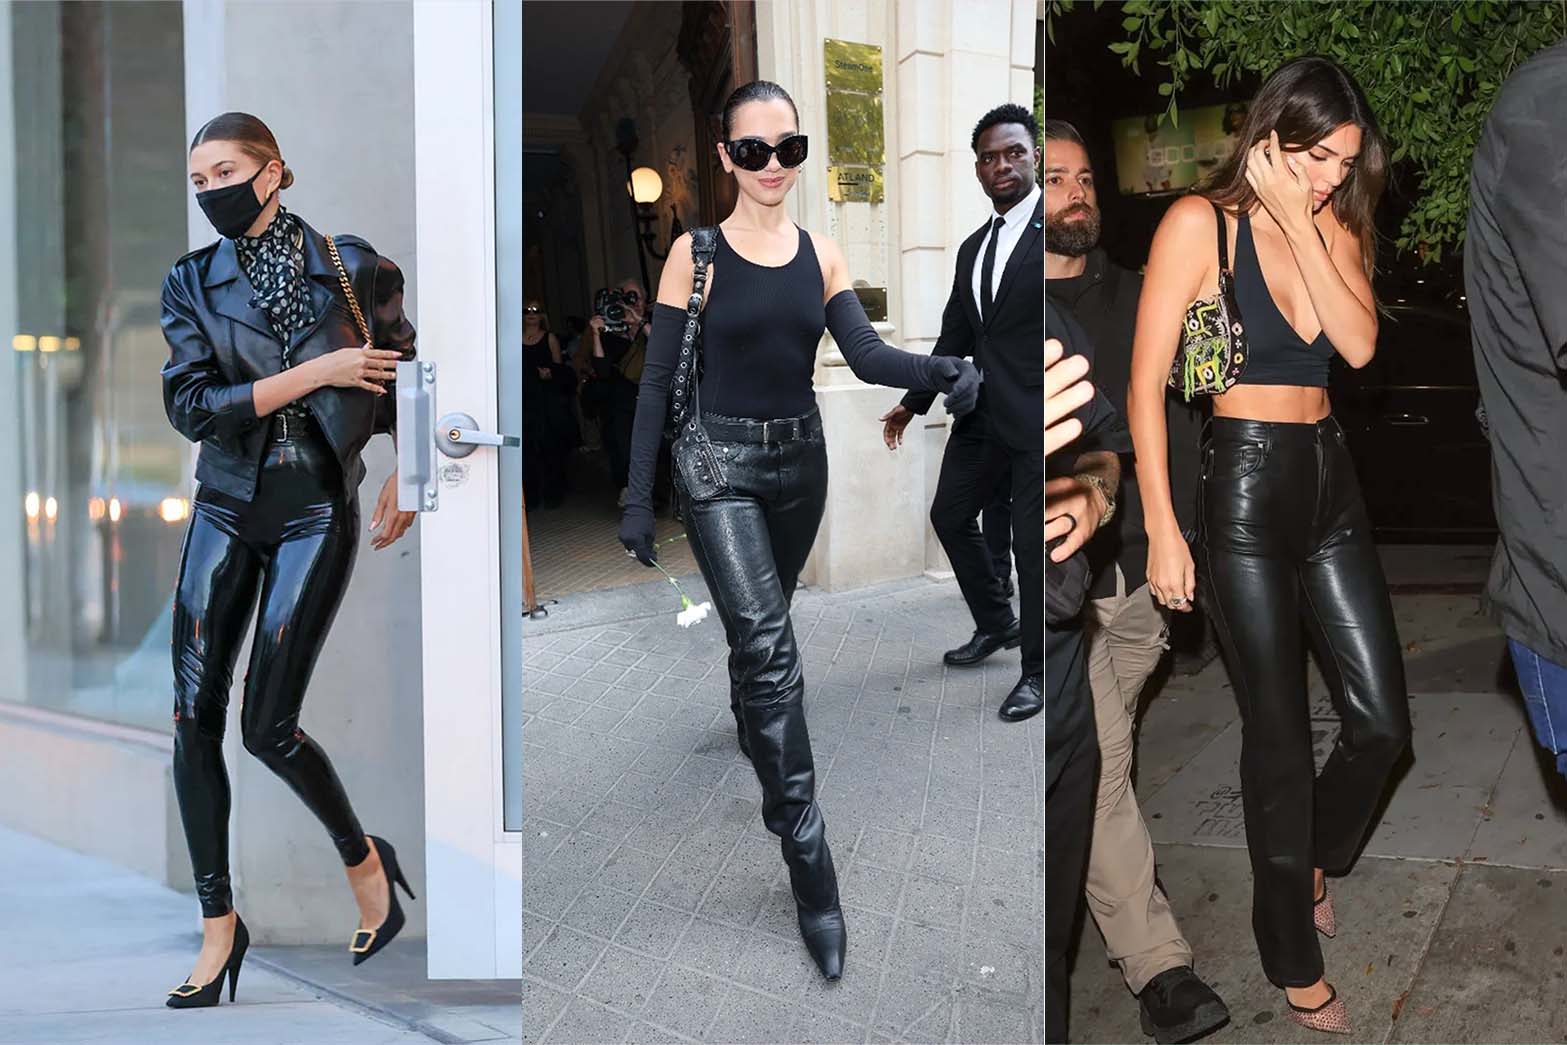 https://raydarmagazine.com/wp-content/uploads/2023/01/What-to-Wear-With-Leather-Pants.jpg